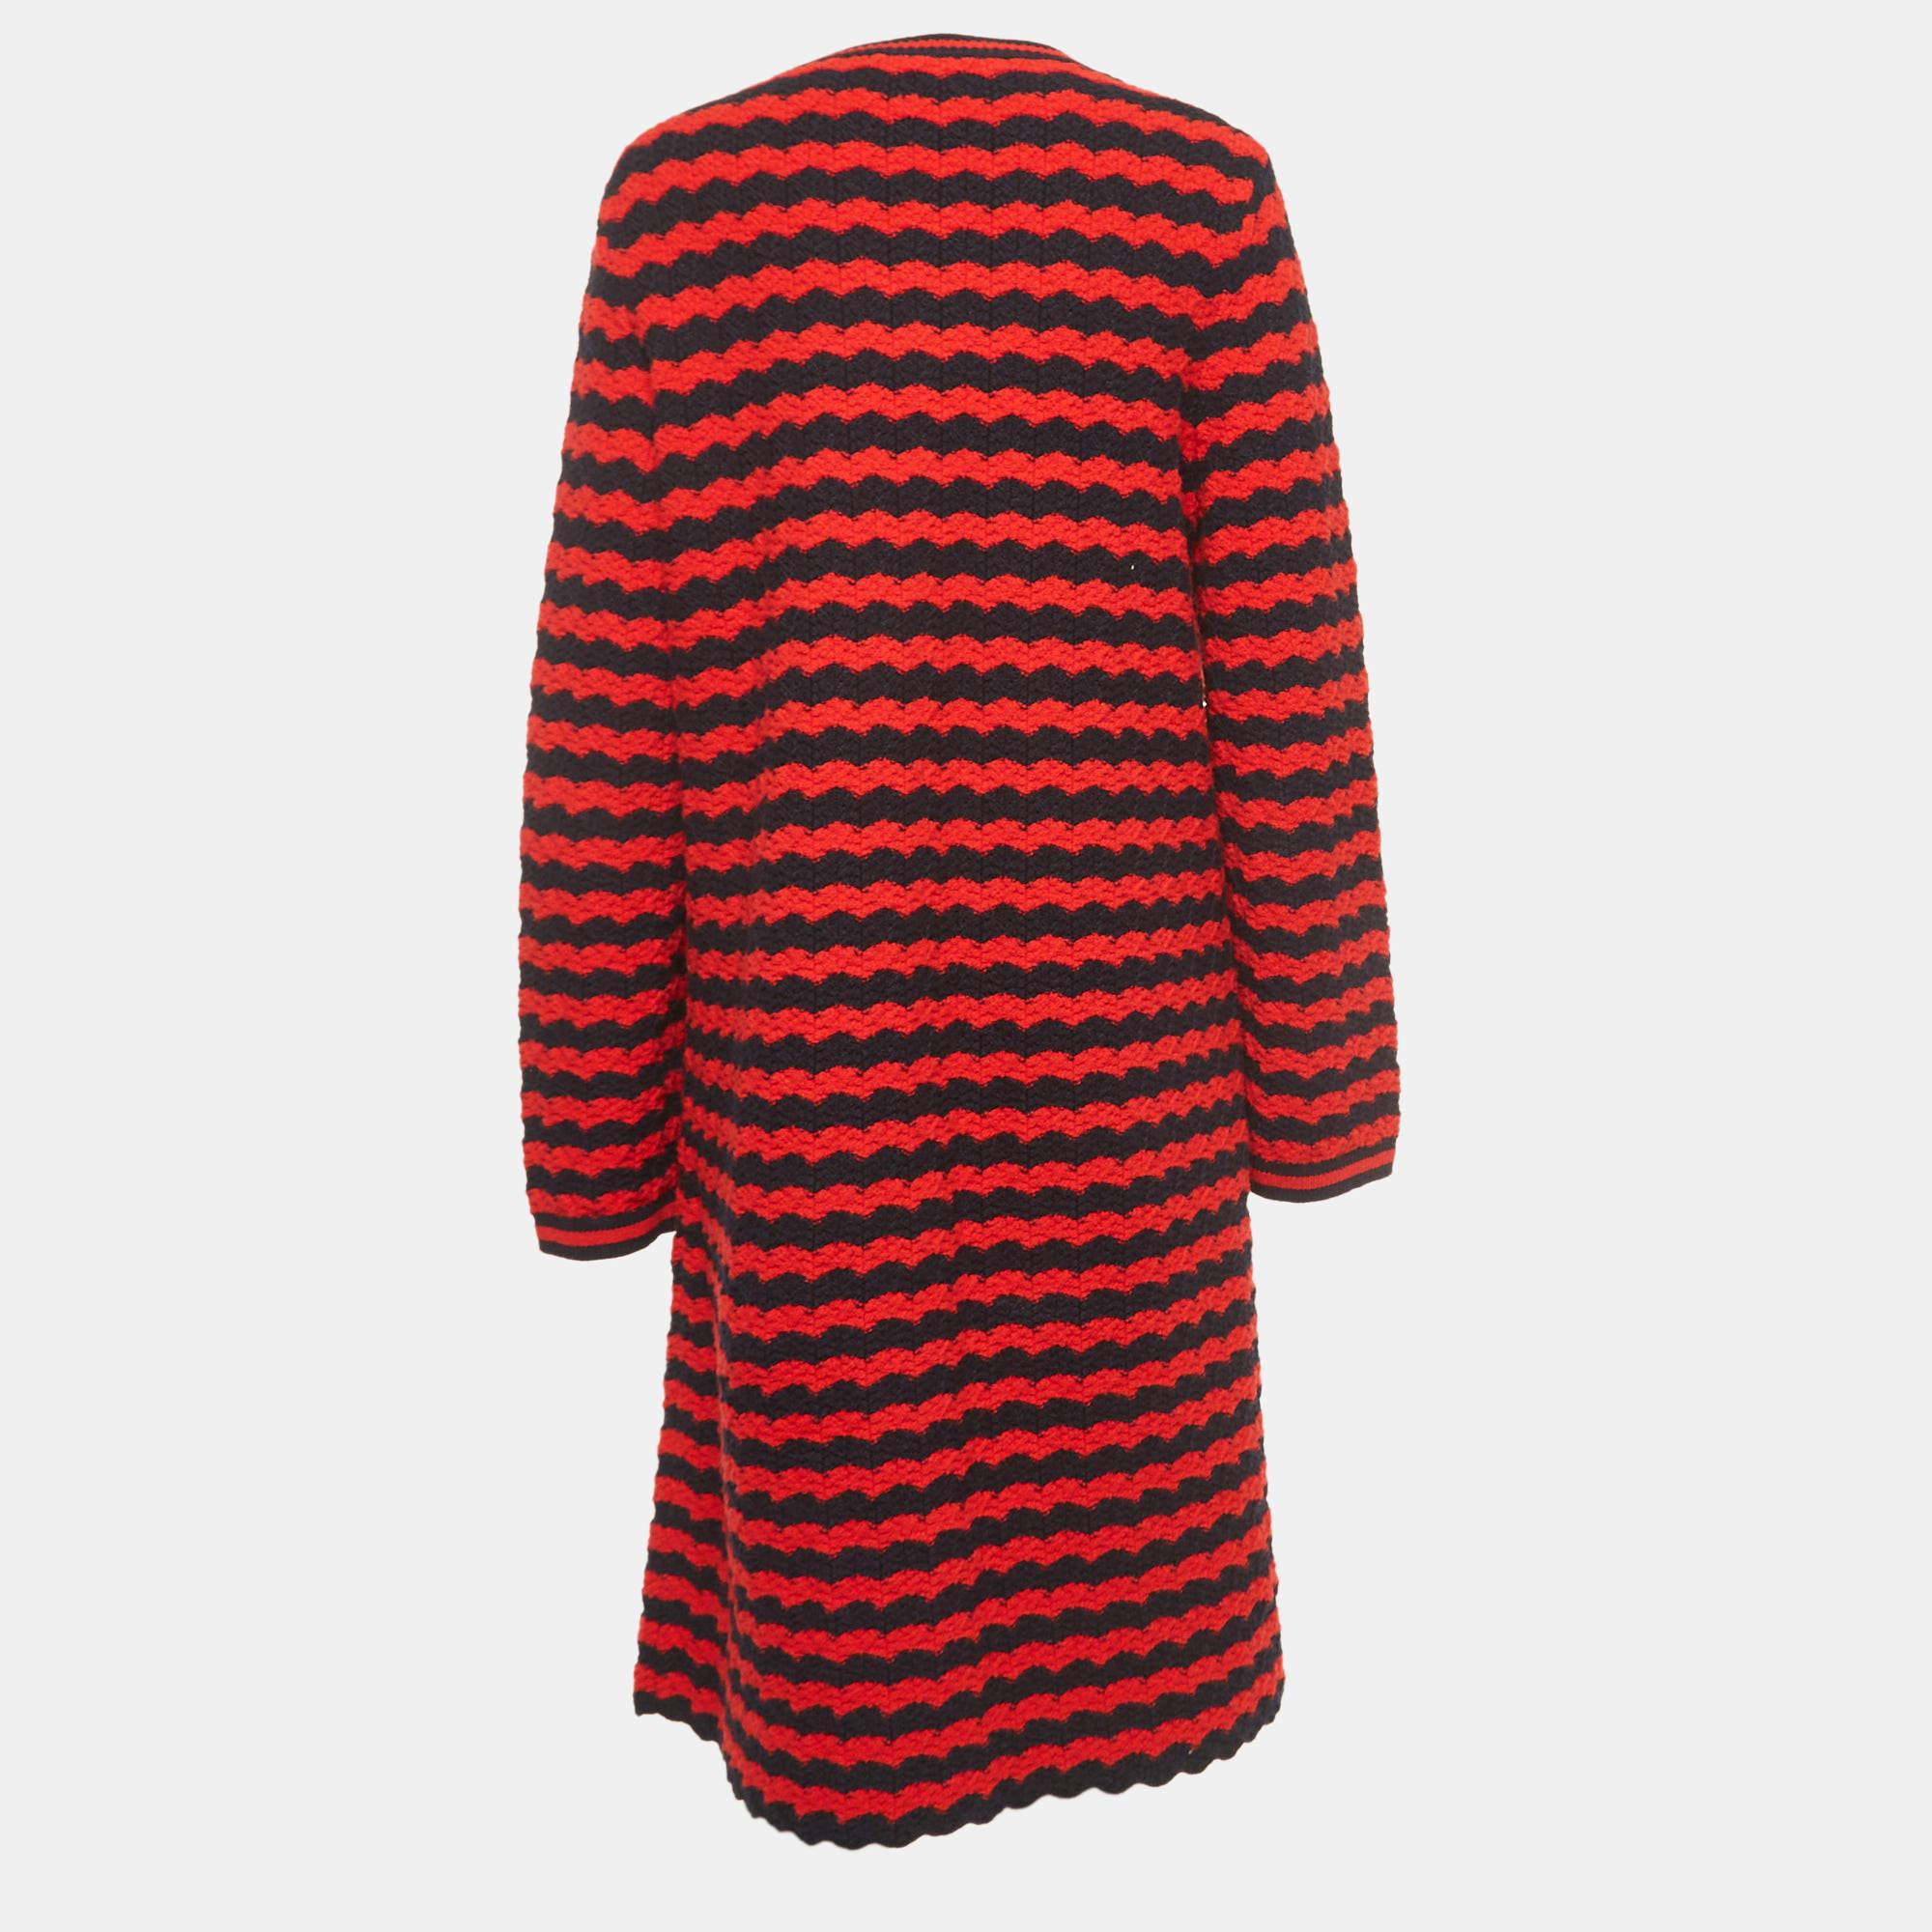 Your closet is never complete without a stunning cardigan as this. This cardigan from Gucci is efficiently tailored using high-quality fabric in a pleasant shade, which adds a luxurious edge to your outfit.

